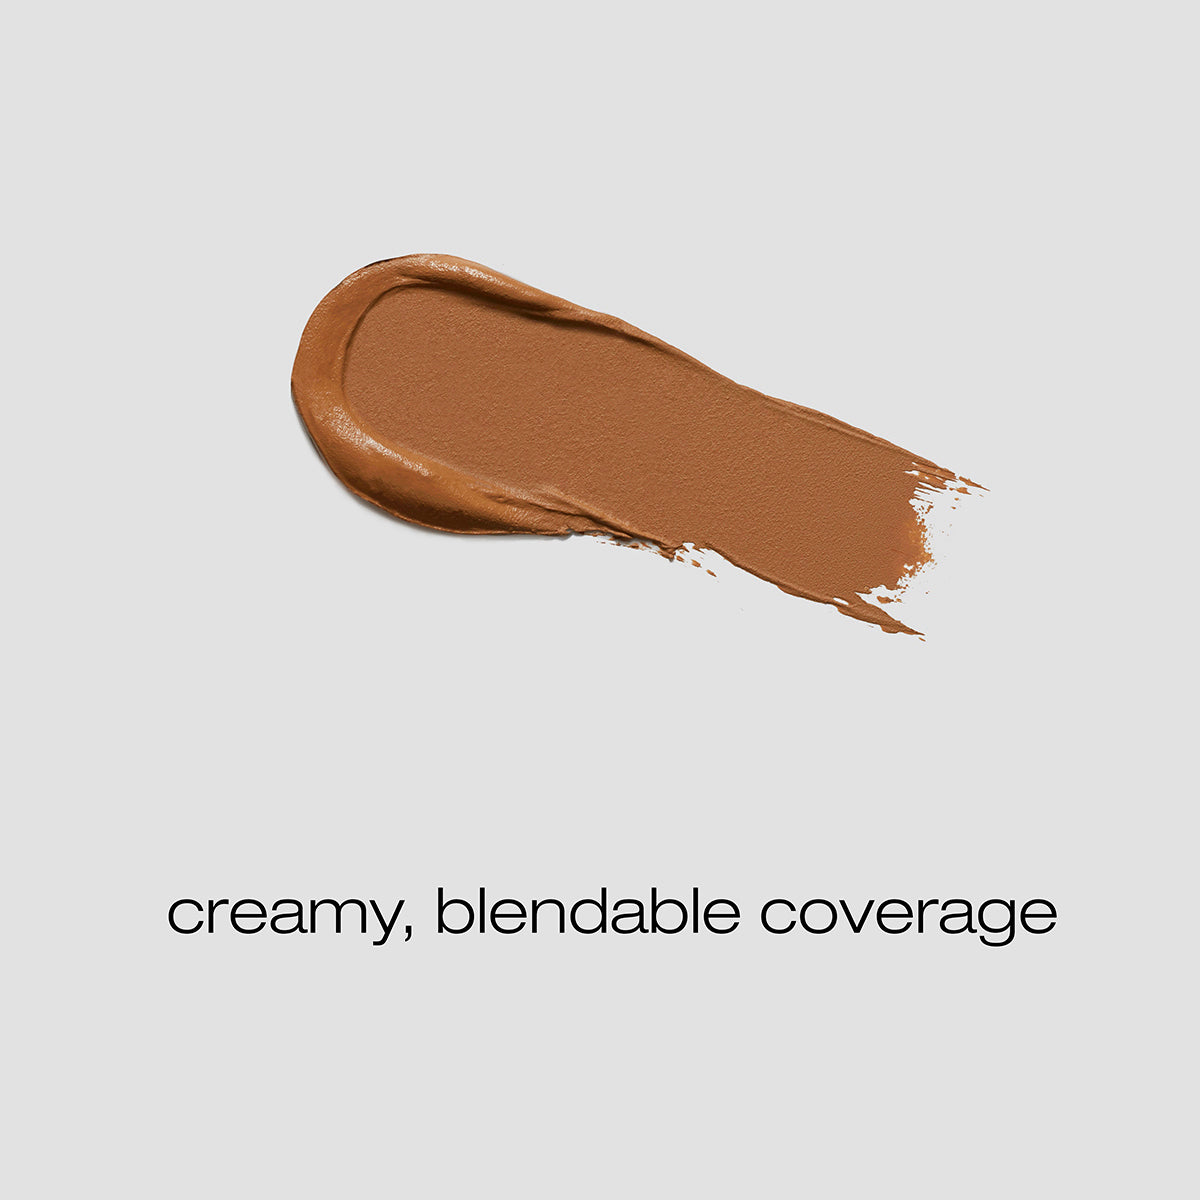 Spread of the Hazelnut concealer with description of creamy, blendable coverage